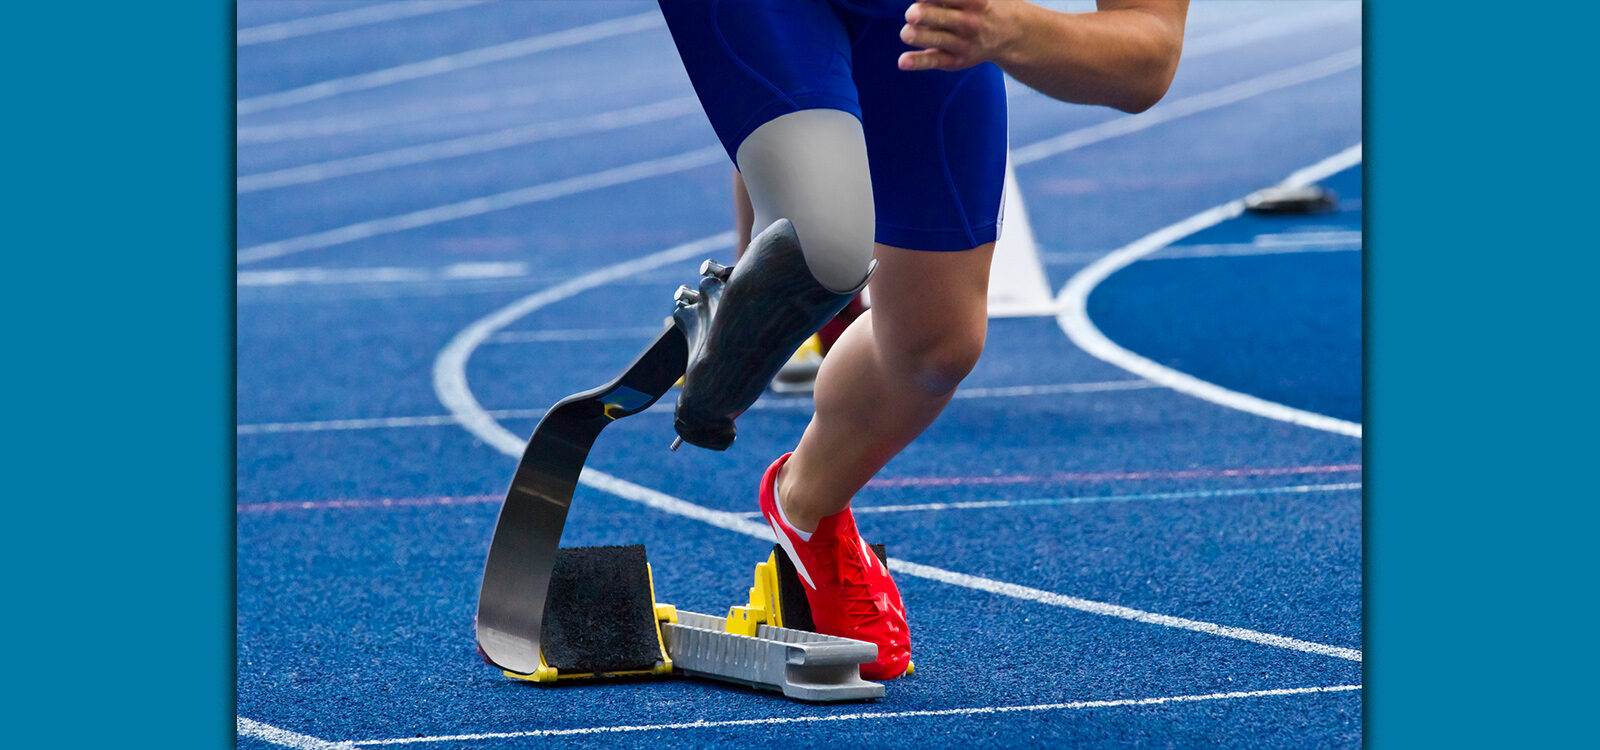 Can disabled athletes outcompete able-bodied athletes?